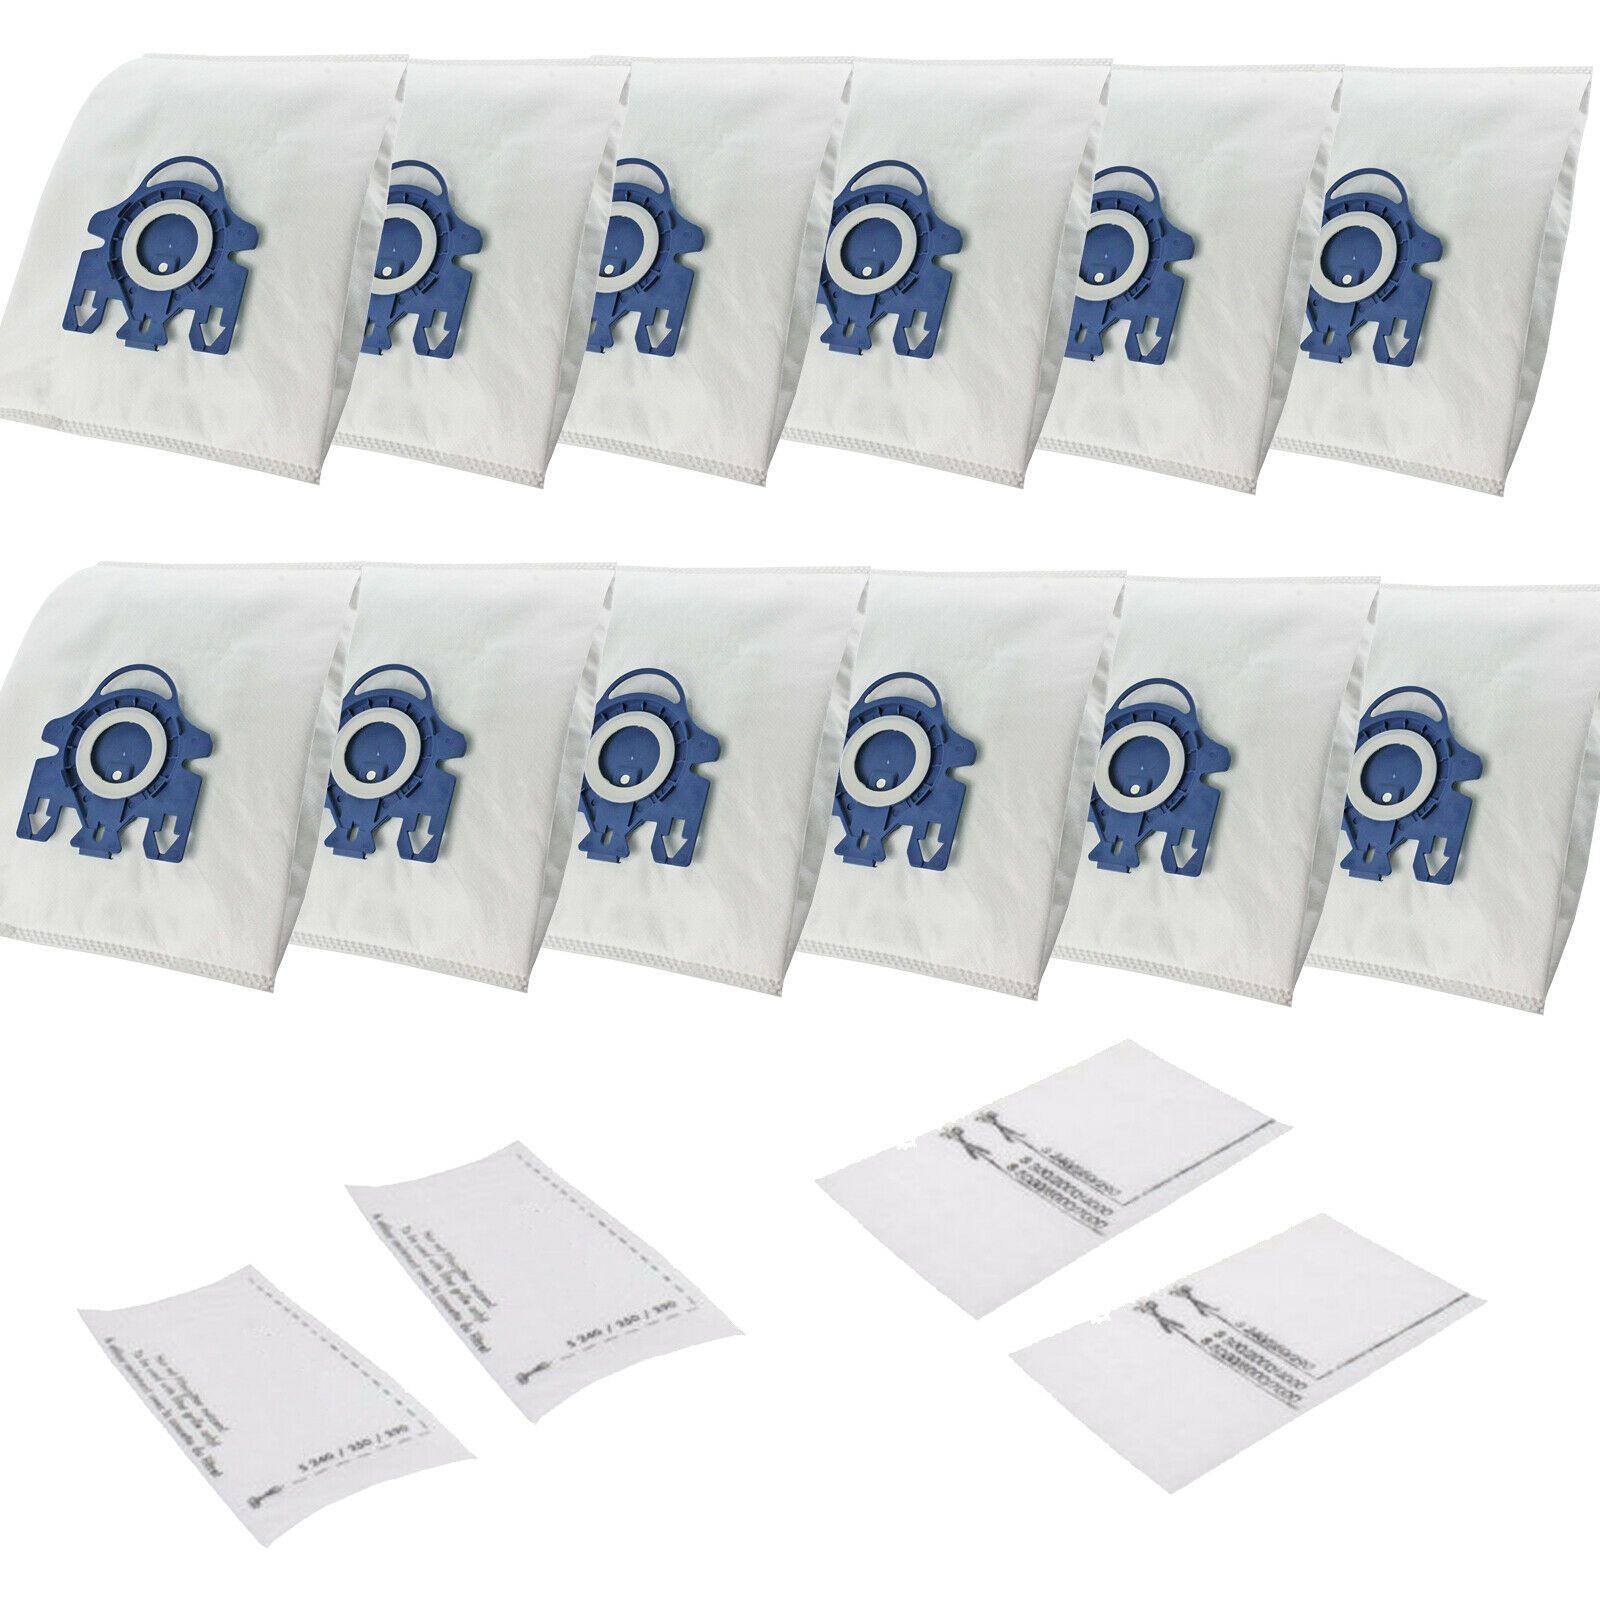 12 Synthetic Vacuum Bag + 8 Filter For Miele C2 C3 S5 S8 S5210 S5211 S8310 Sparesbarn